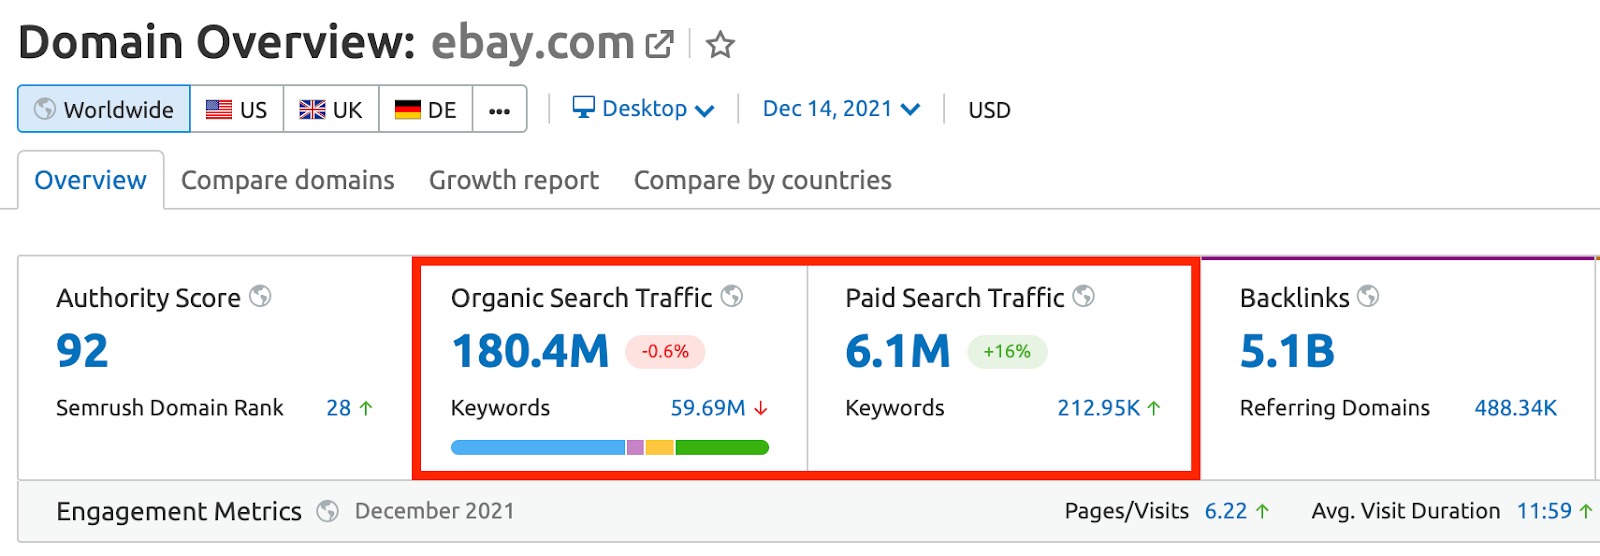 Why are different traffic values shown in Domain Analytics and Traffic Analytics? image 2